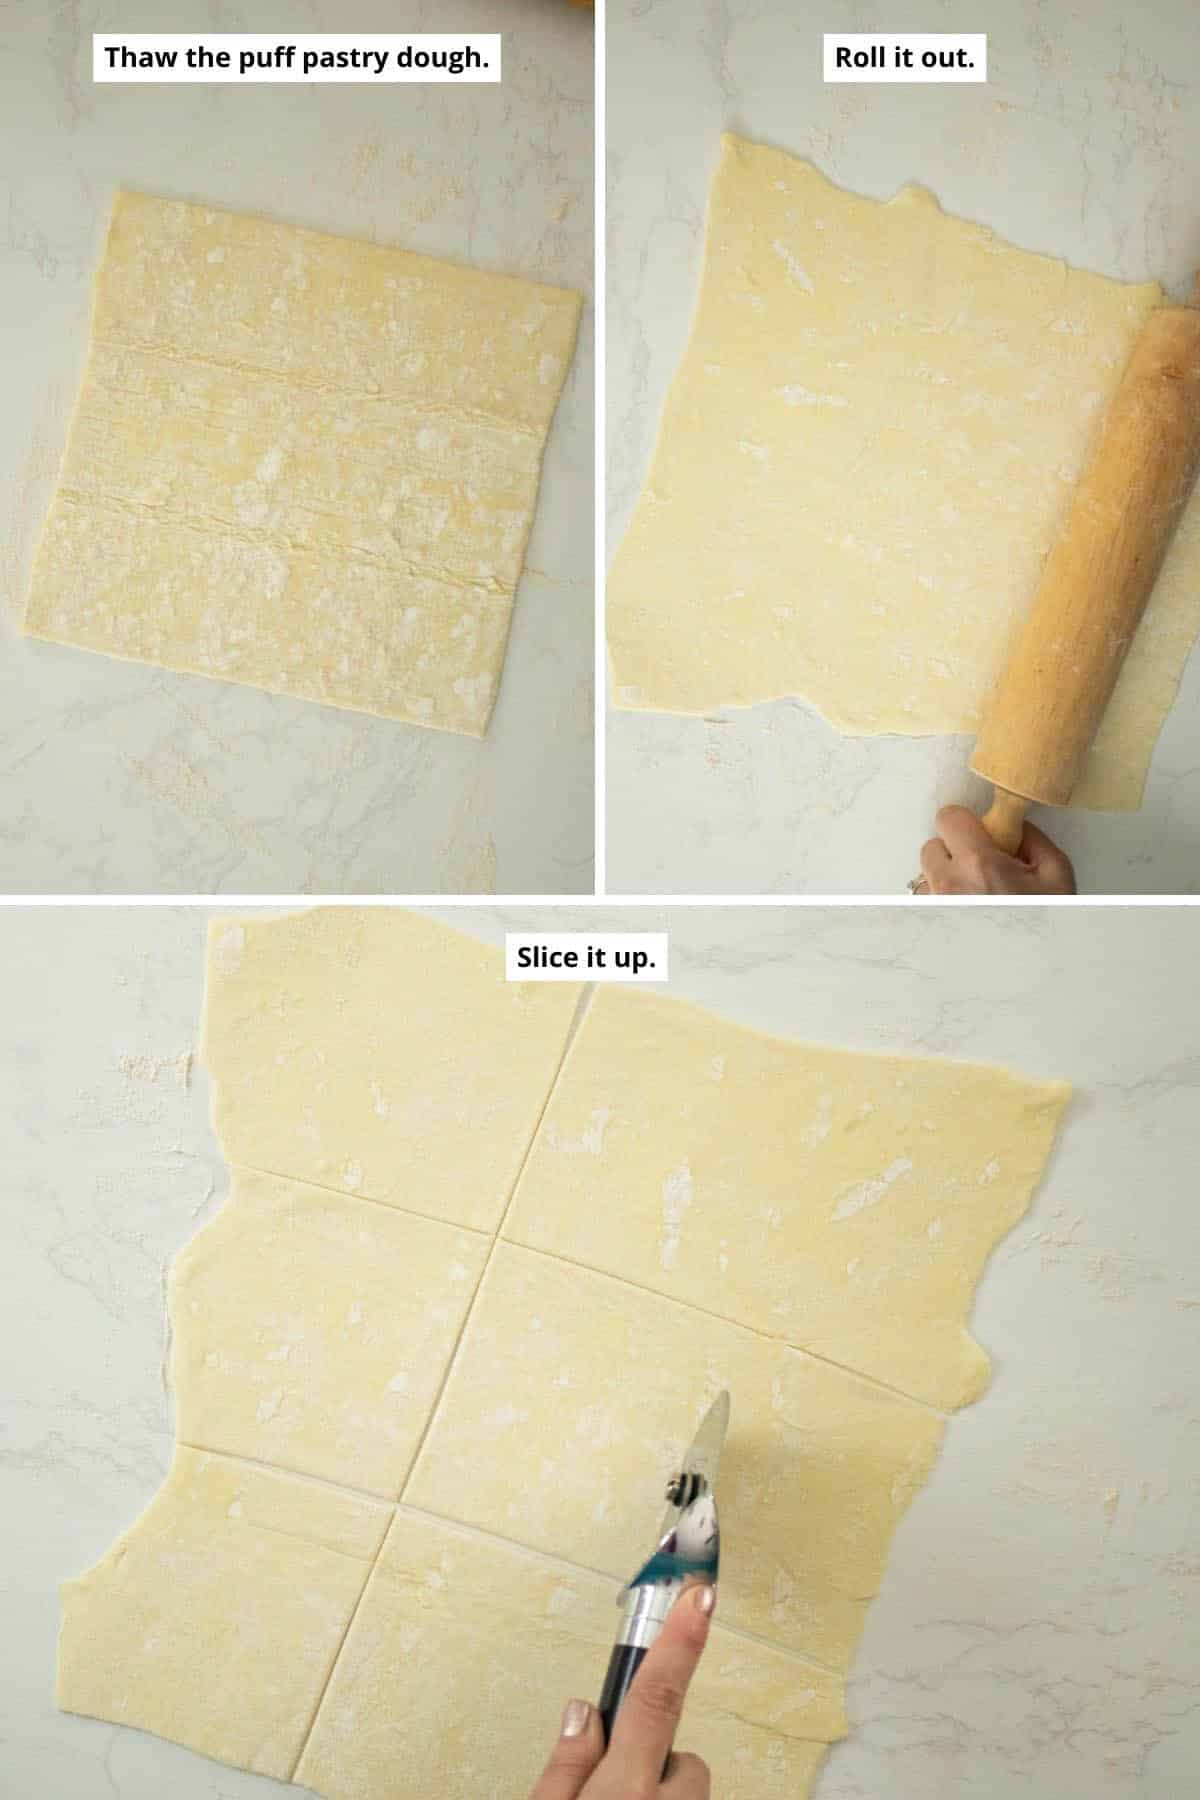 image collage showing the thawed puff pastry before and after rolling out and being sliced with a pizza cutter